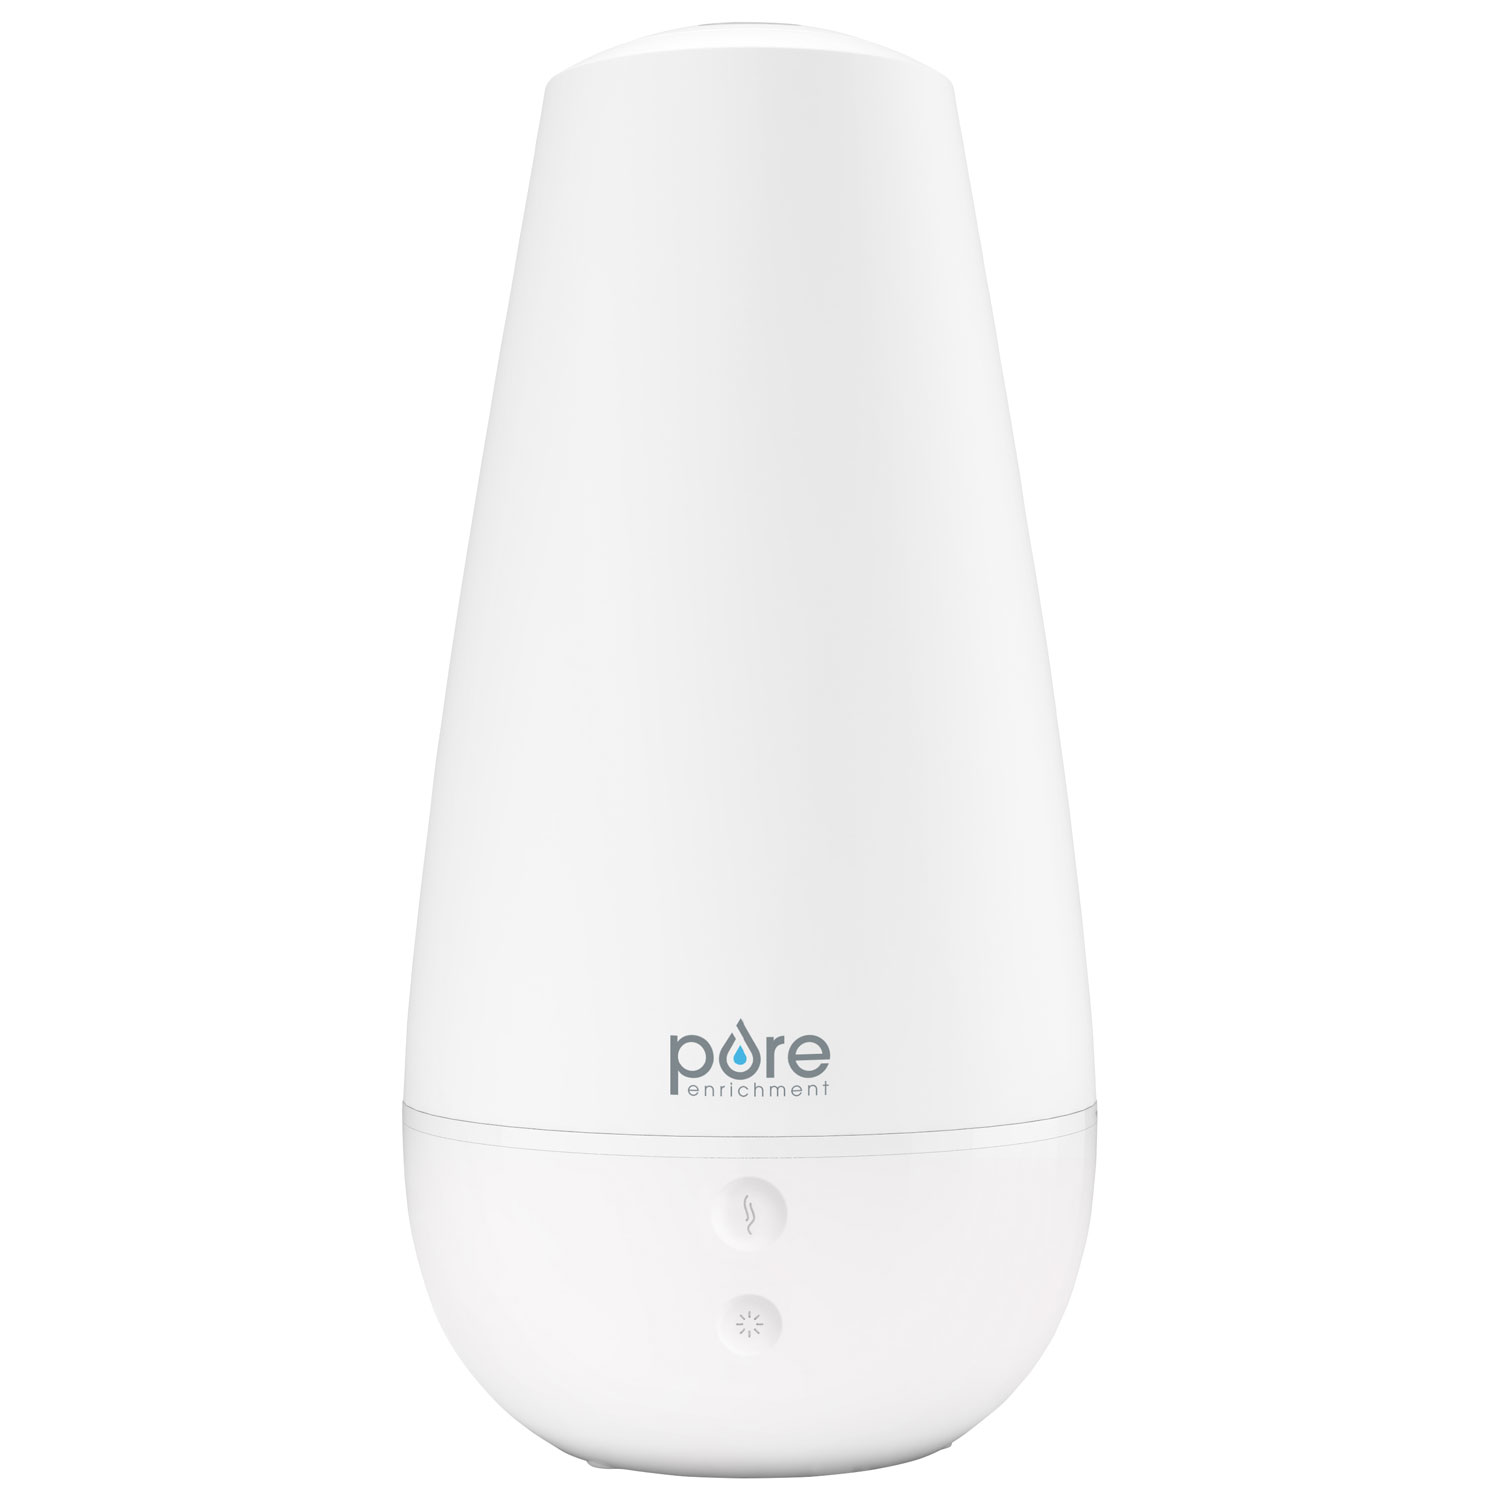 PureSpa Pure Enrichment XL 3-in-1 Aroma Cool Mist Humidifier